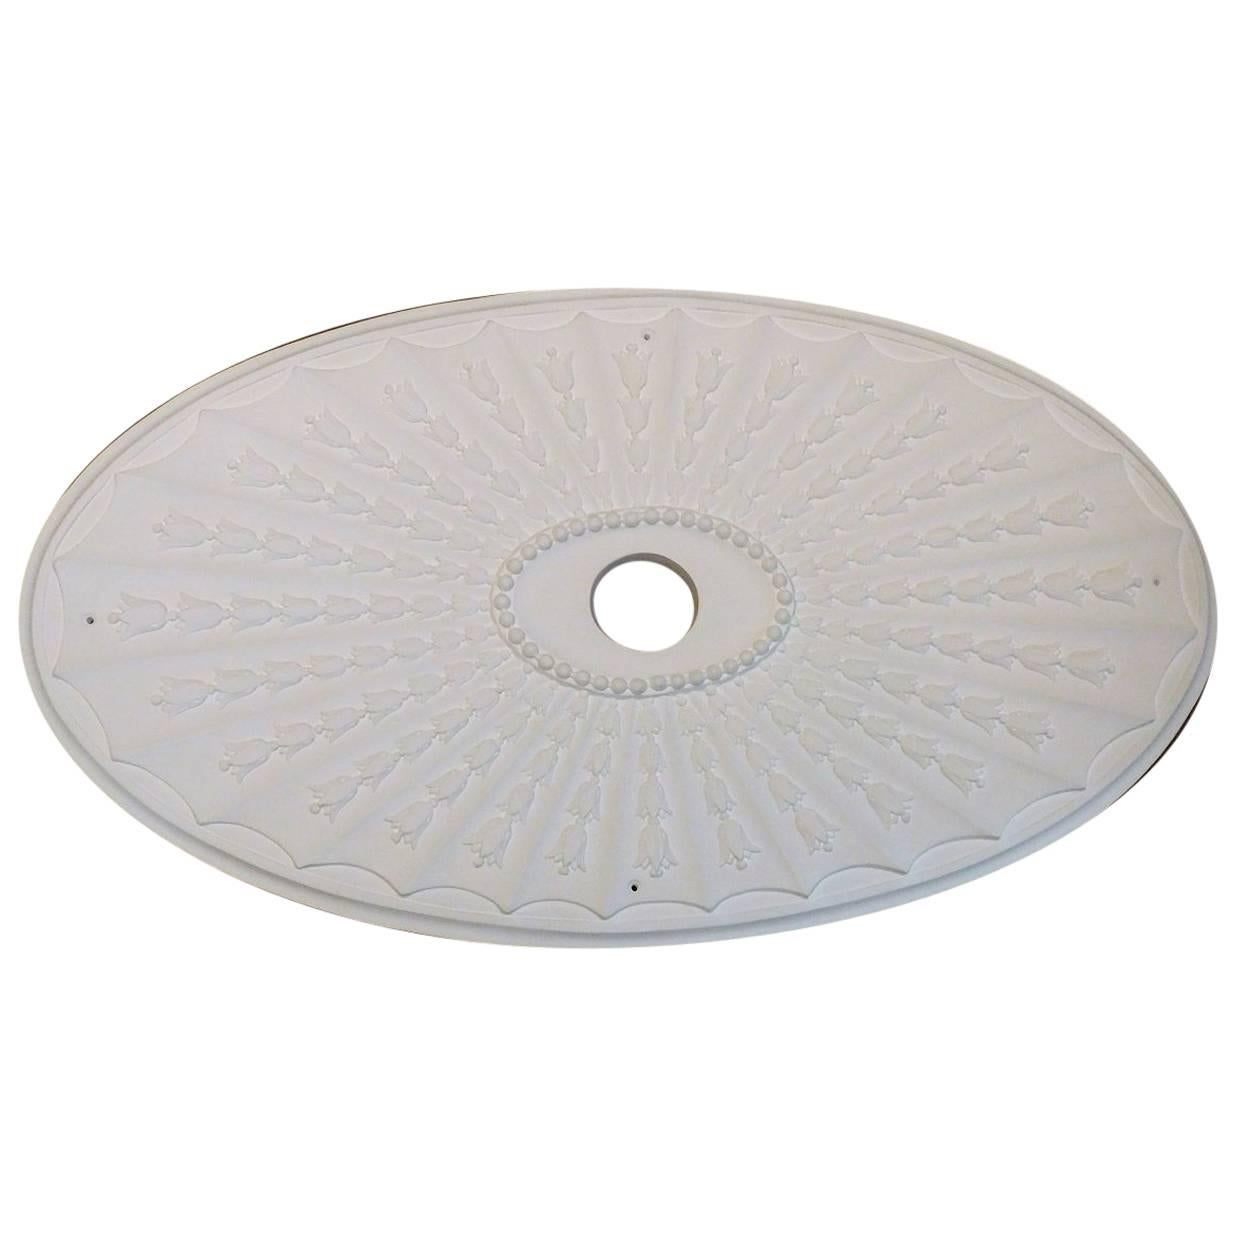 "Oval Tulip" Plaster Ceiling Medallions For Sale